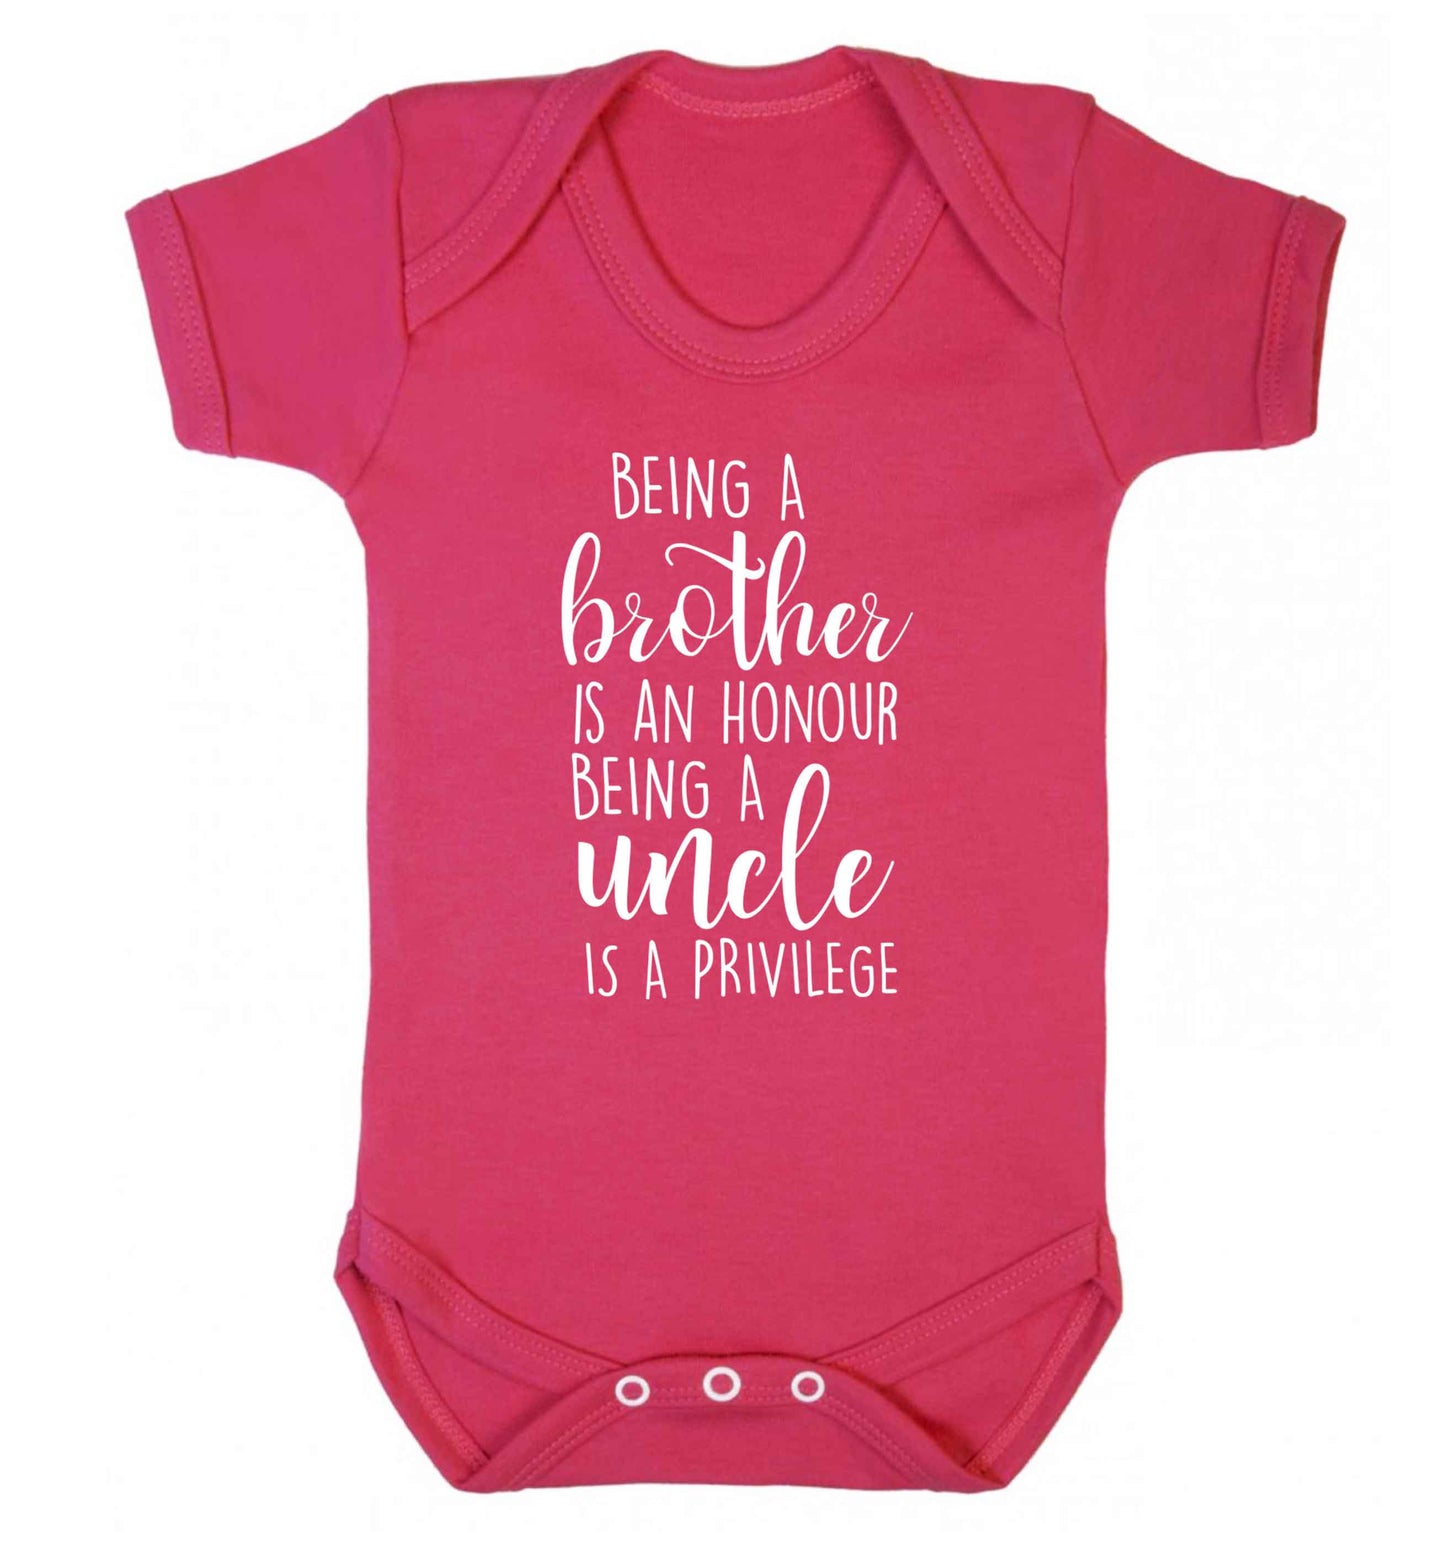 Being a brother is an honour being an uncle is a privilege Baby Vest dark pink 18-24 months